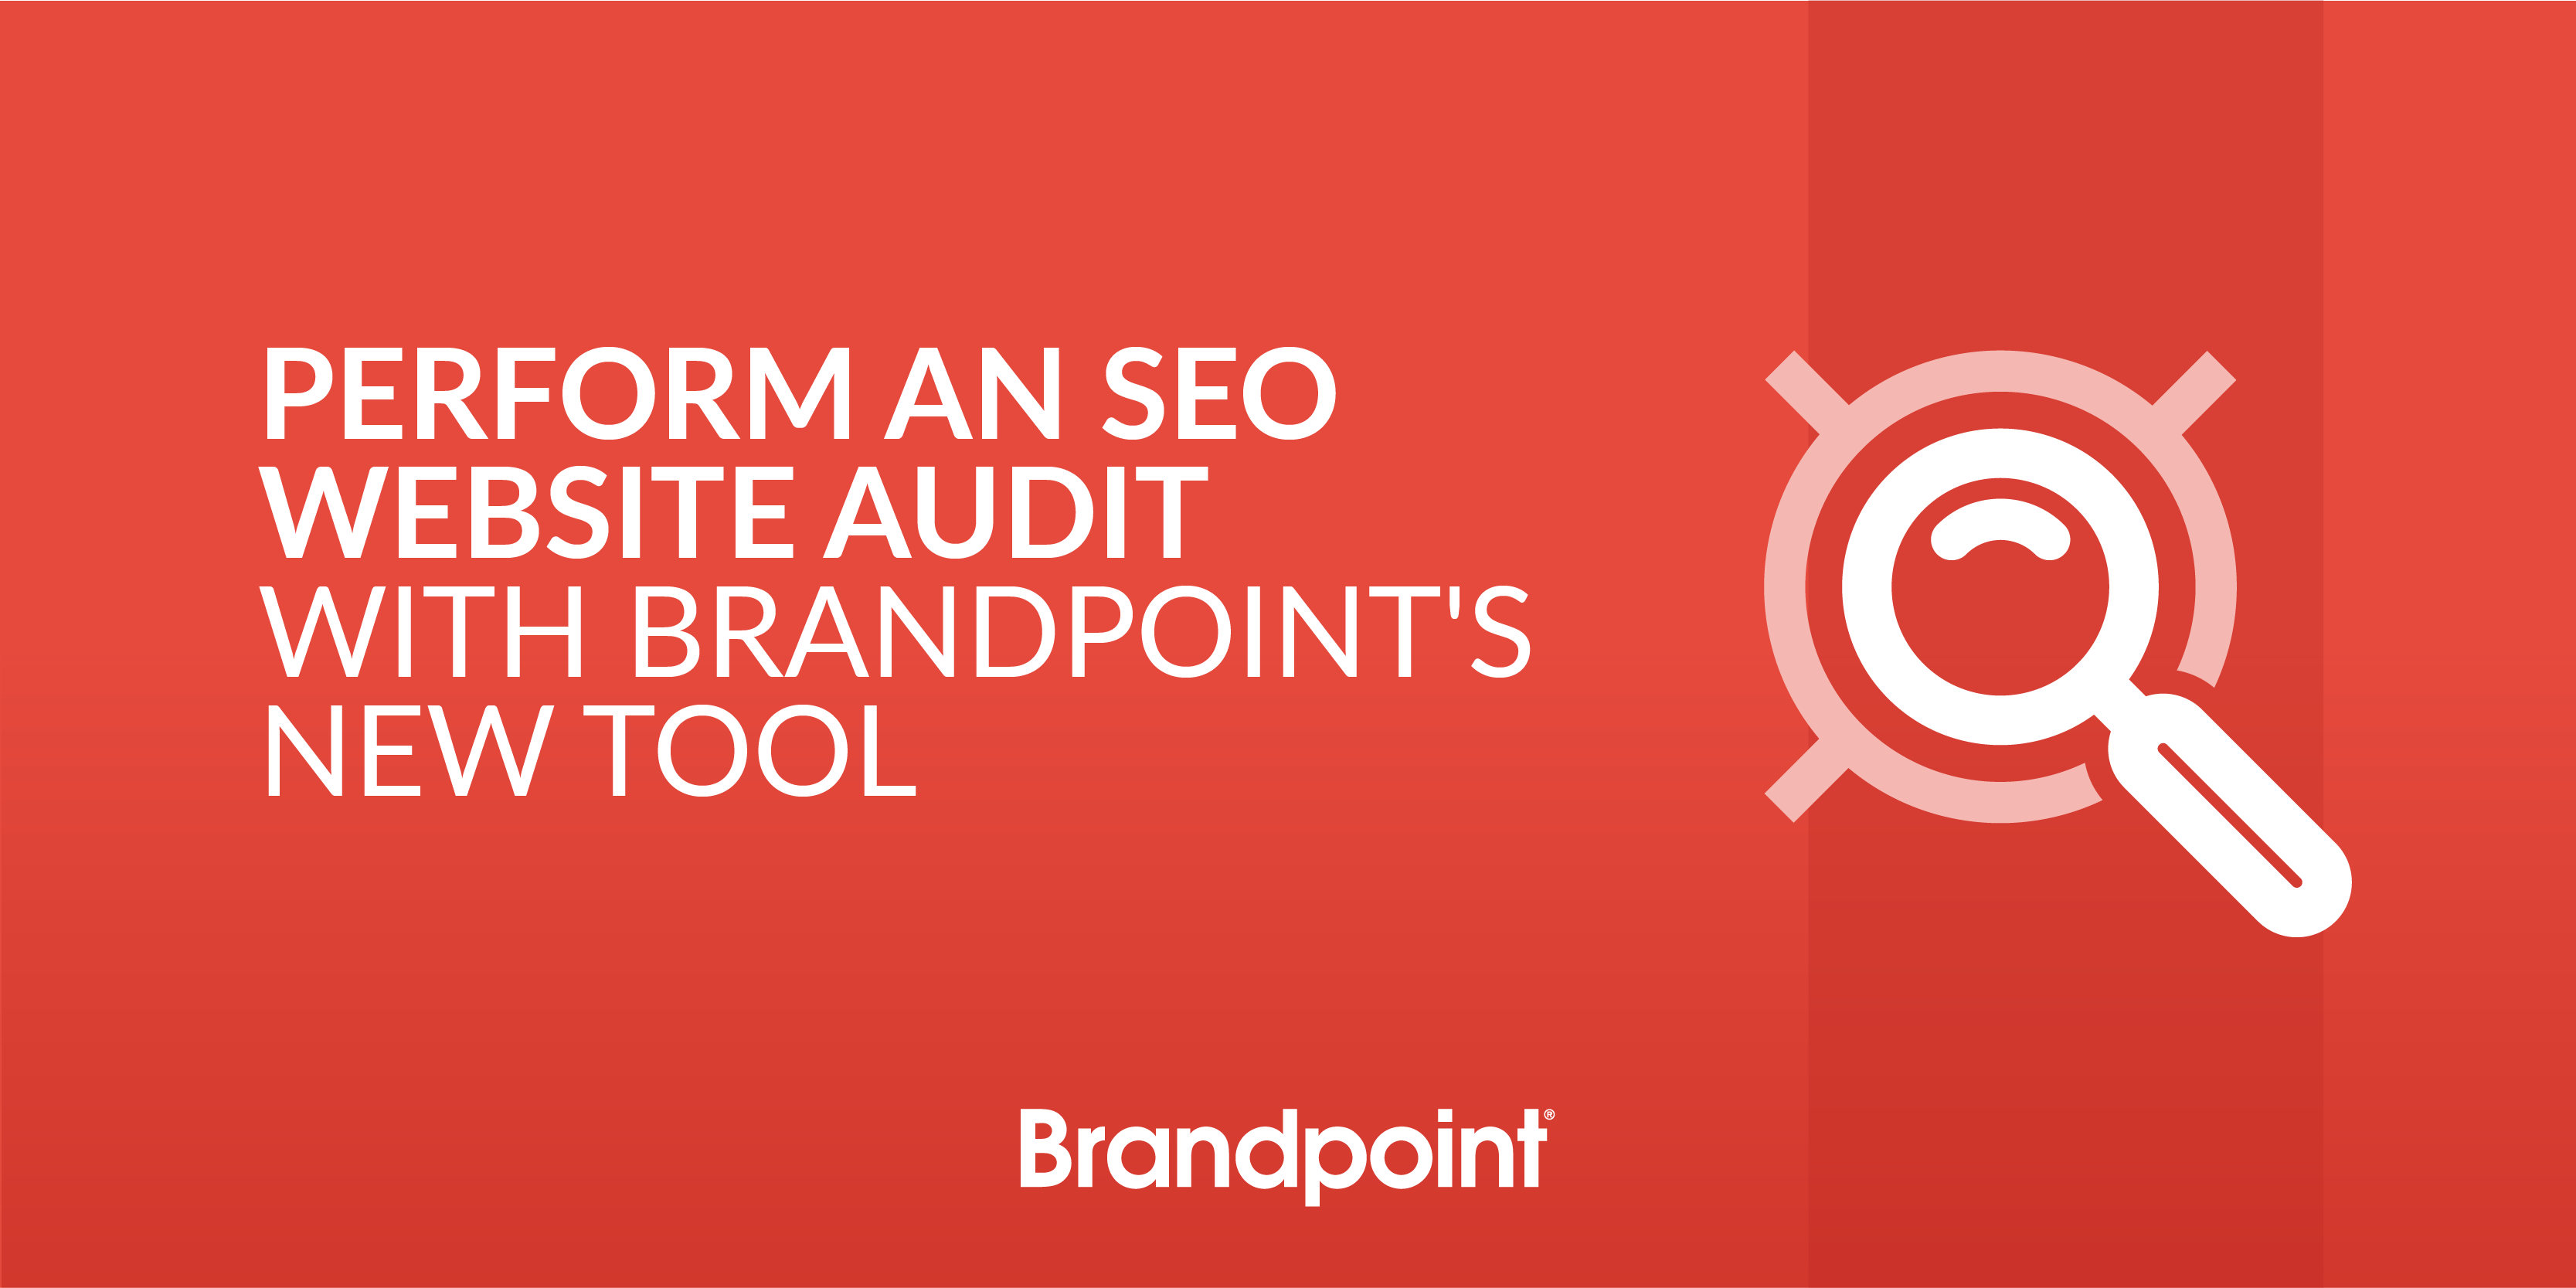 BPT Blog - Perform an SEO Website Audit with Brandpoints New Tool